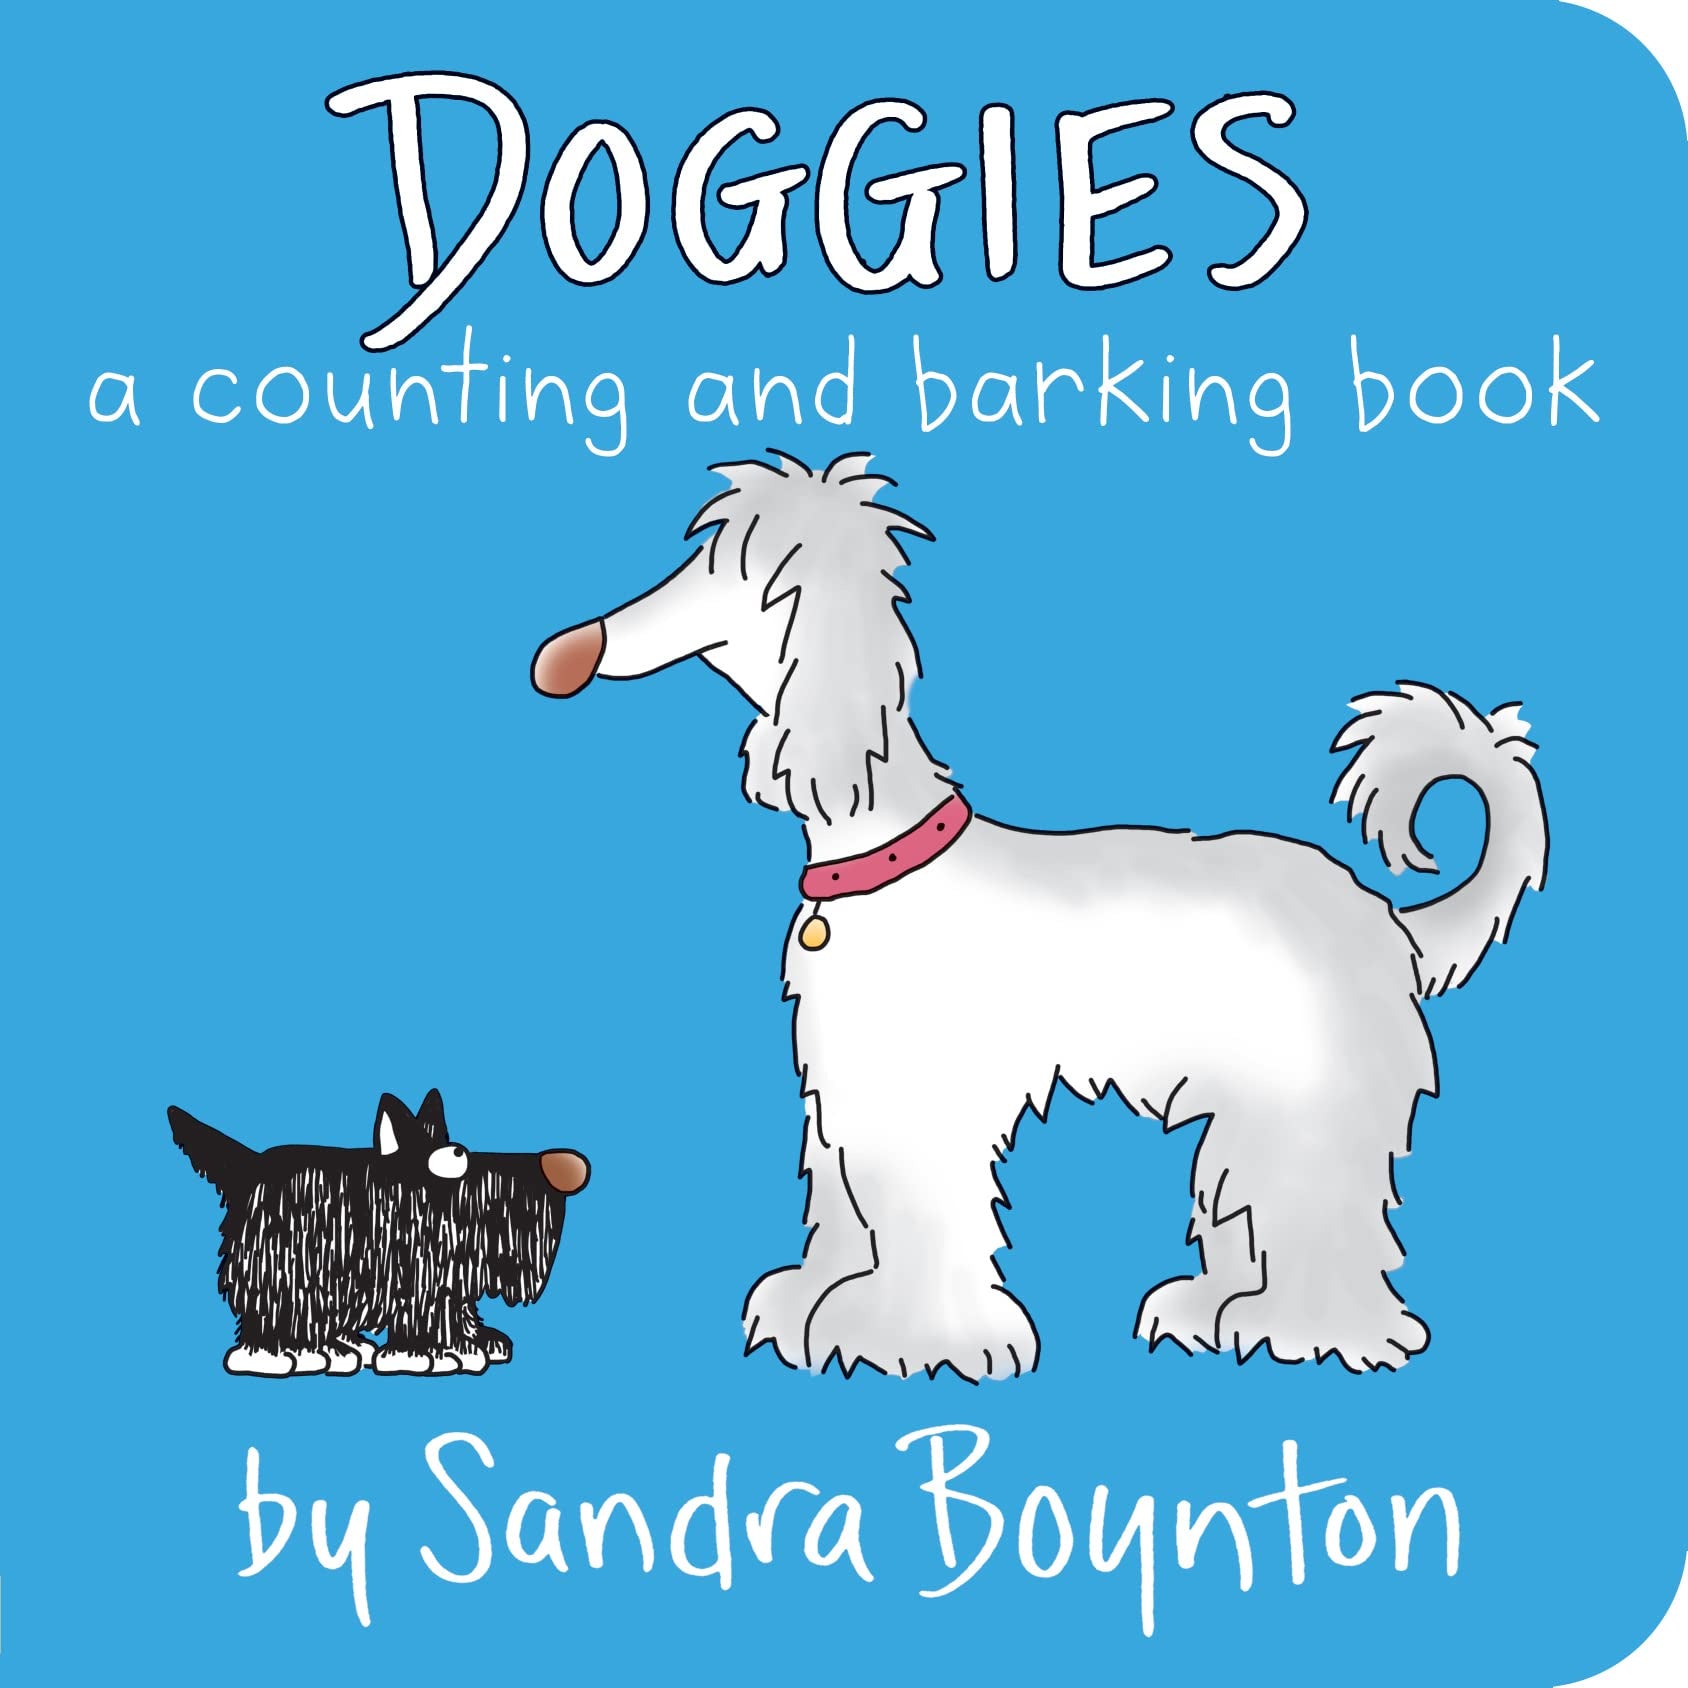 Doggies - A Counting and Barking Book